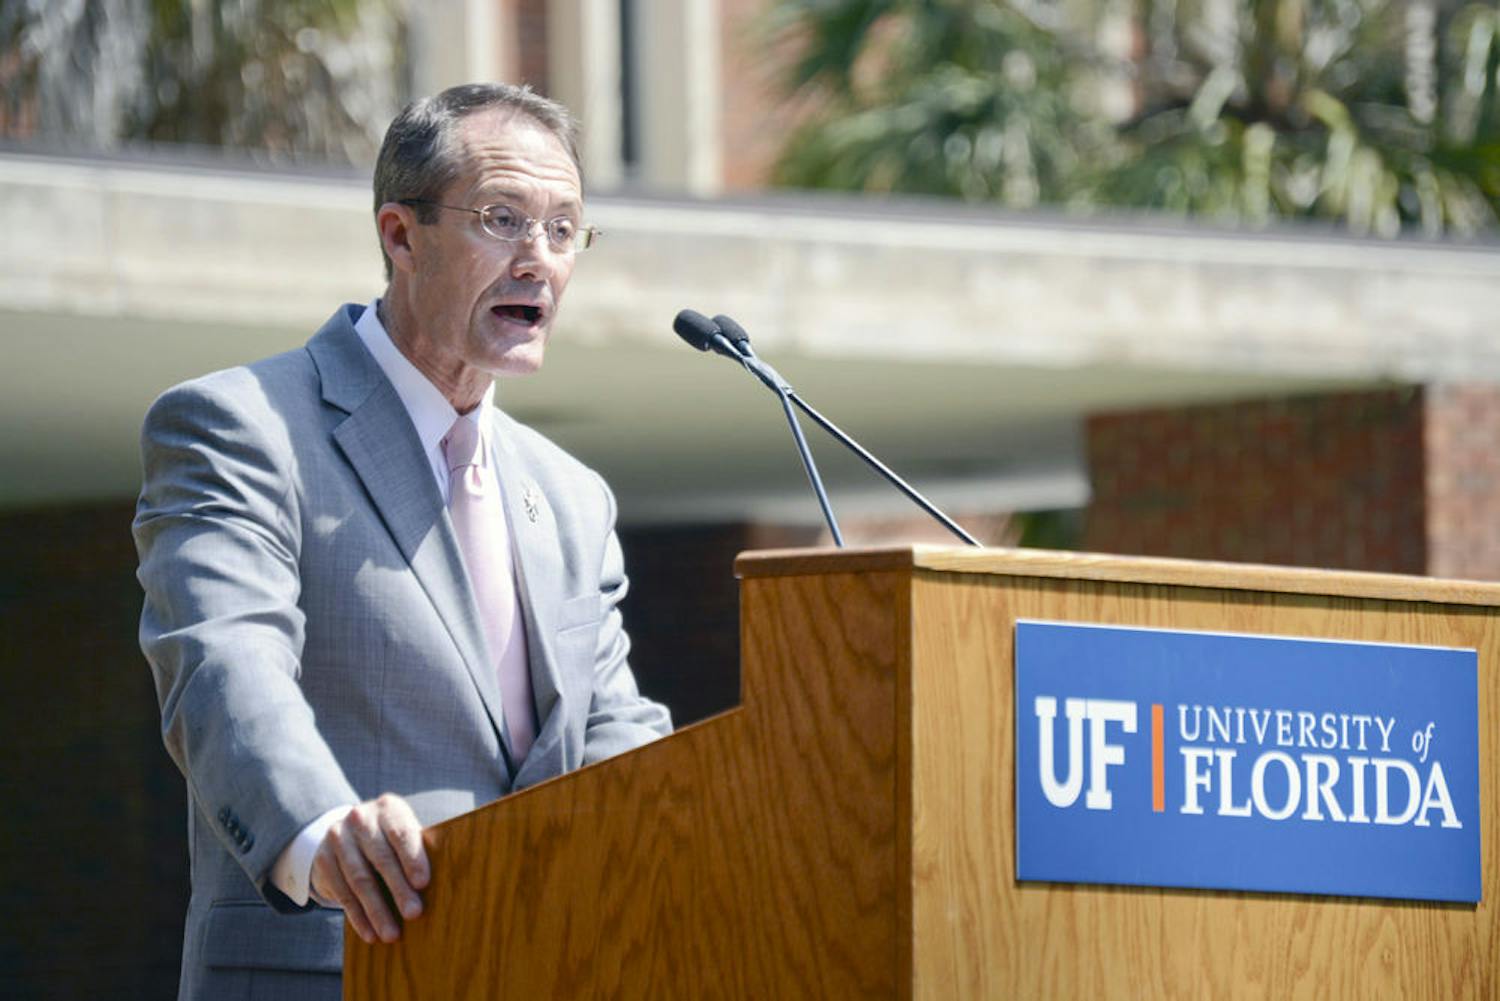 Dr. Charlie Lane, senior vice president of UF, speaks to a crowd on Plaza of the Americas on Wednesday about UF’s sustainability achievements and goals. “What’s really important is that students who recycle, ride the bus or learn about composing will embrace these actions for the rest of their lives,” Lane said.